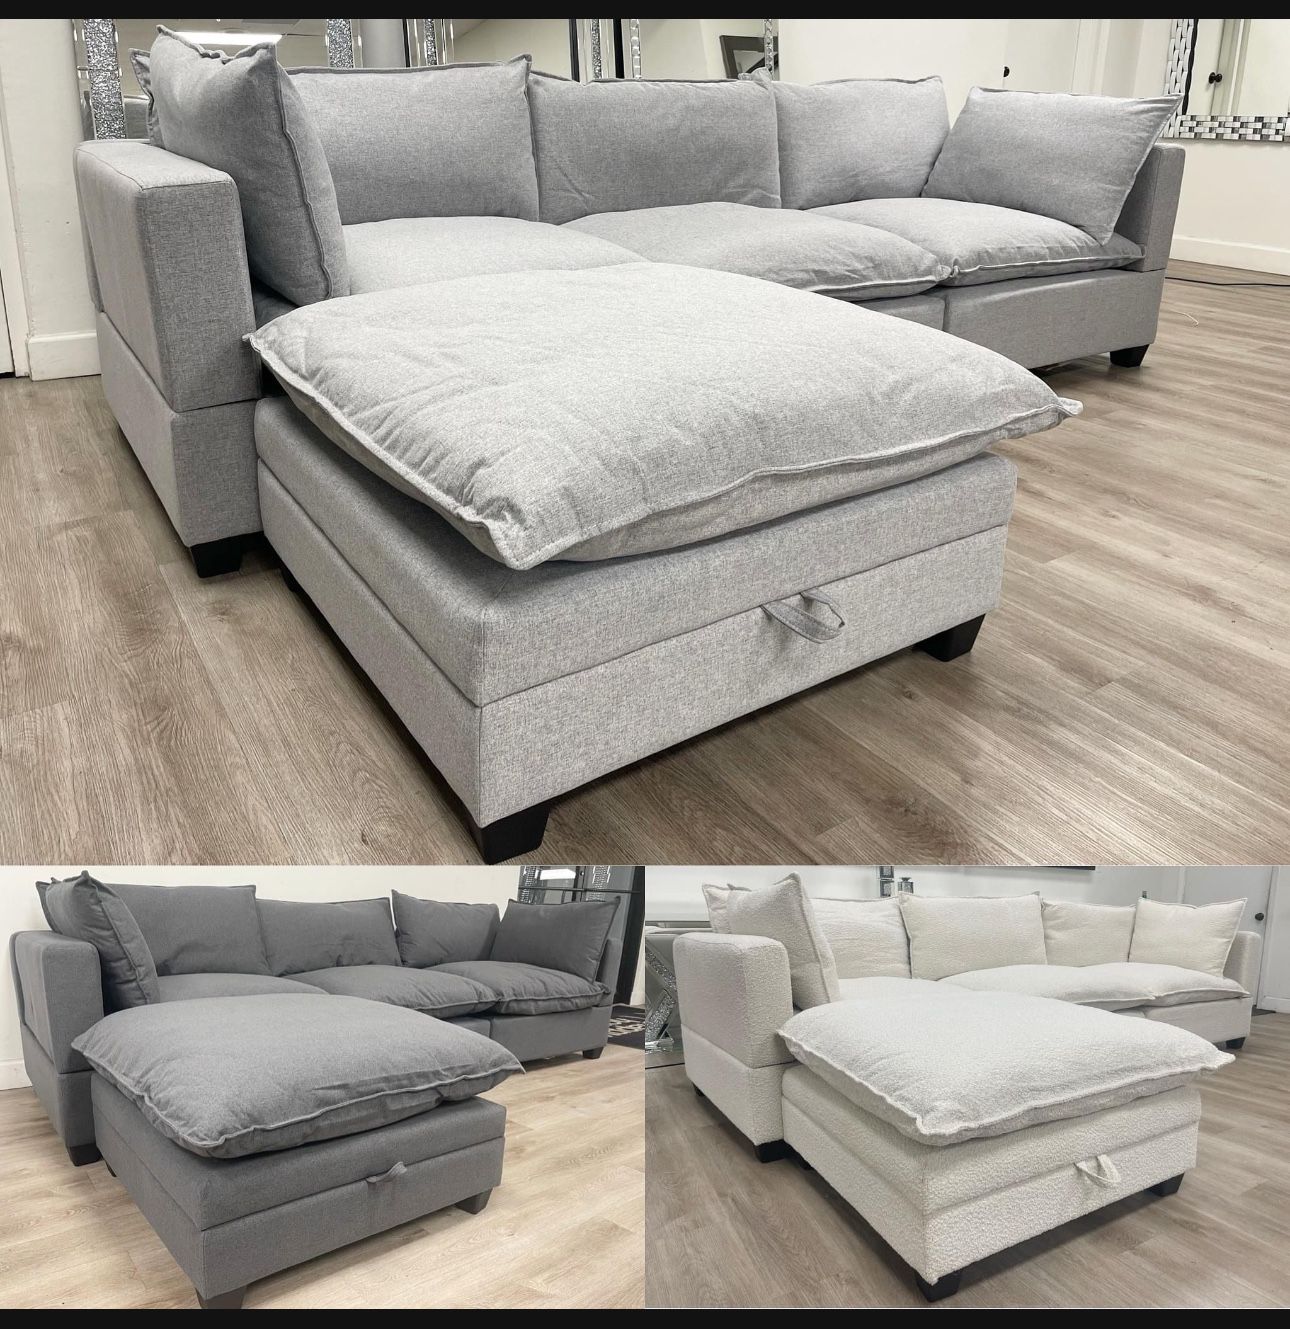 NEW MODULAR SECTIONAL WITH STORAGE OTTOMAN AND FREE DELIVERY 